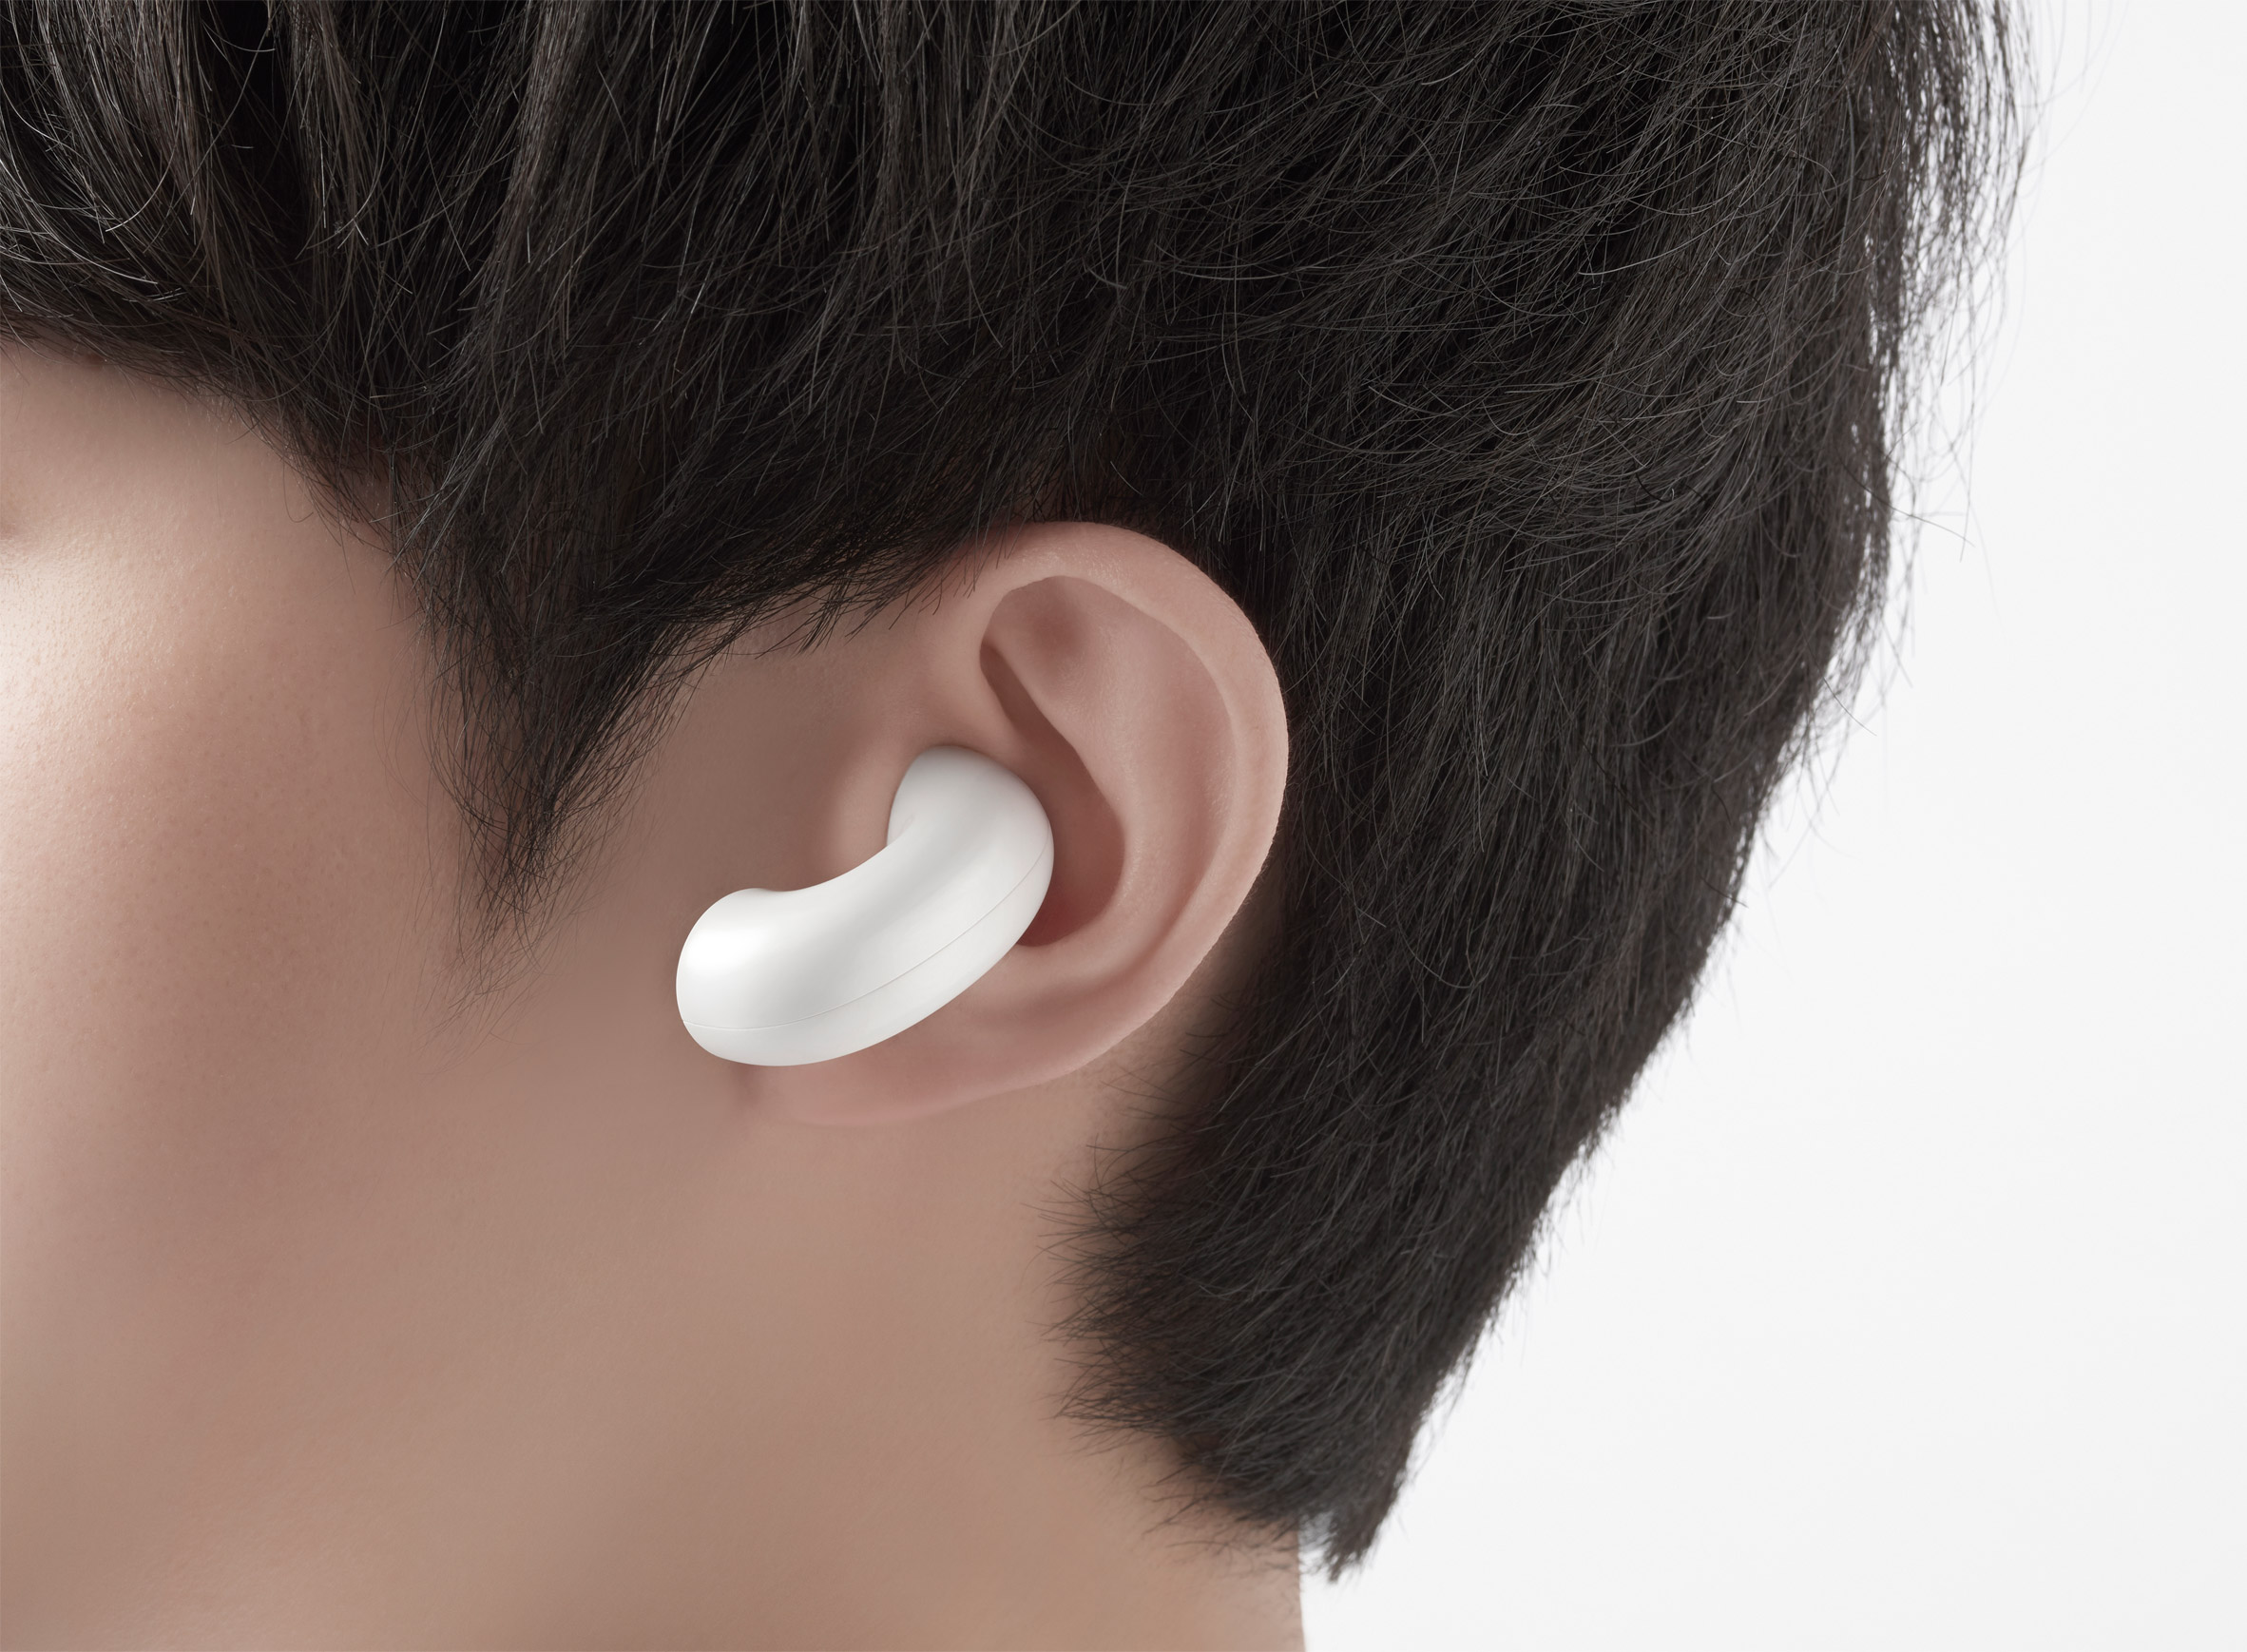 The Music-Link mobile accessory collection by Nendo for OPPO includes a pair of wireless earbuds